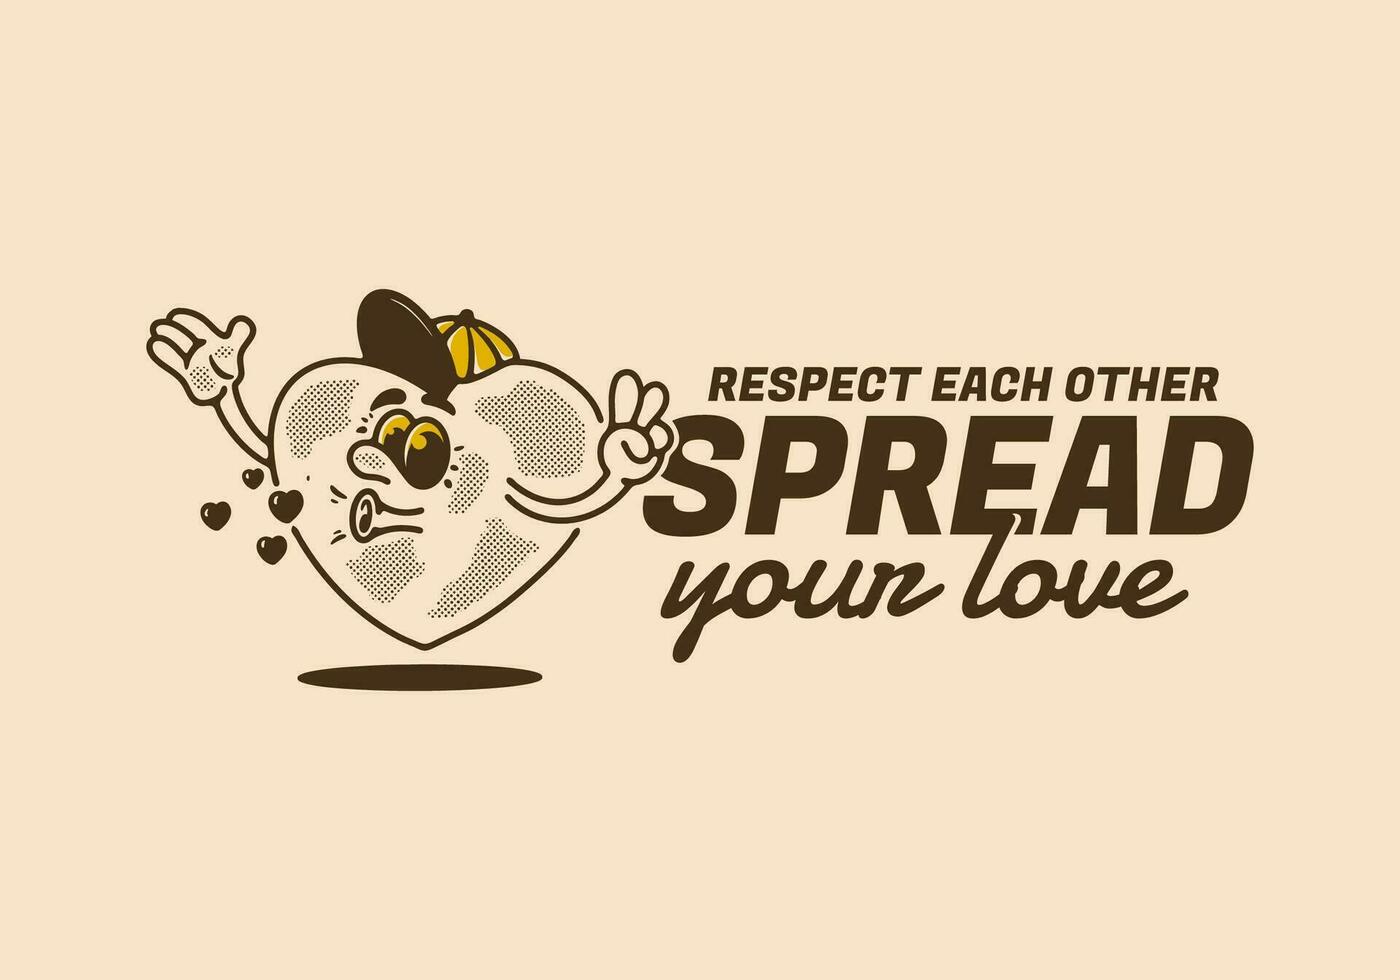 Spread your love, Heart mascot character illustration in vintage style vector